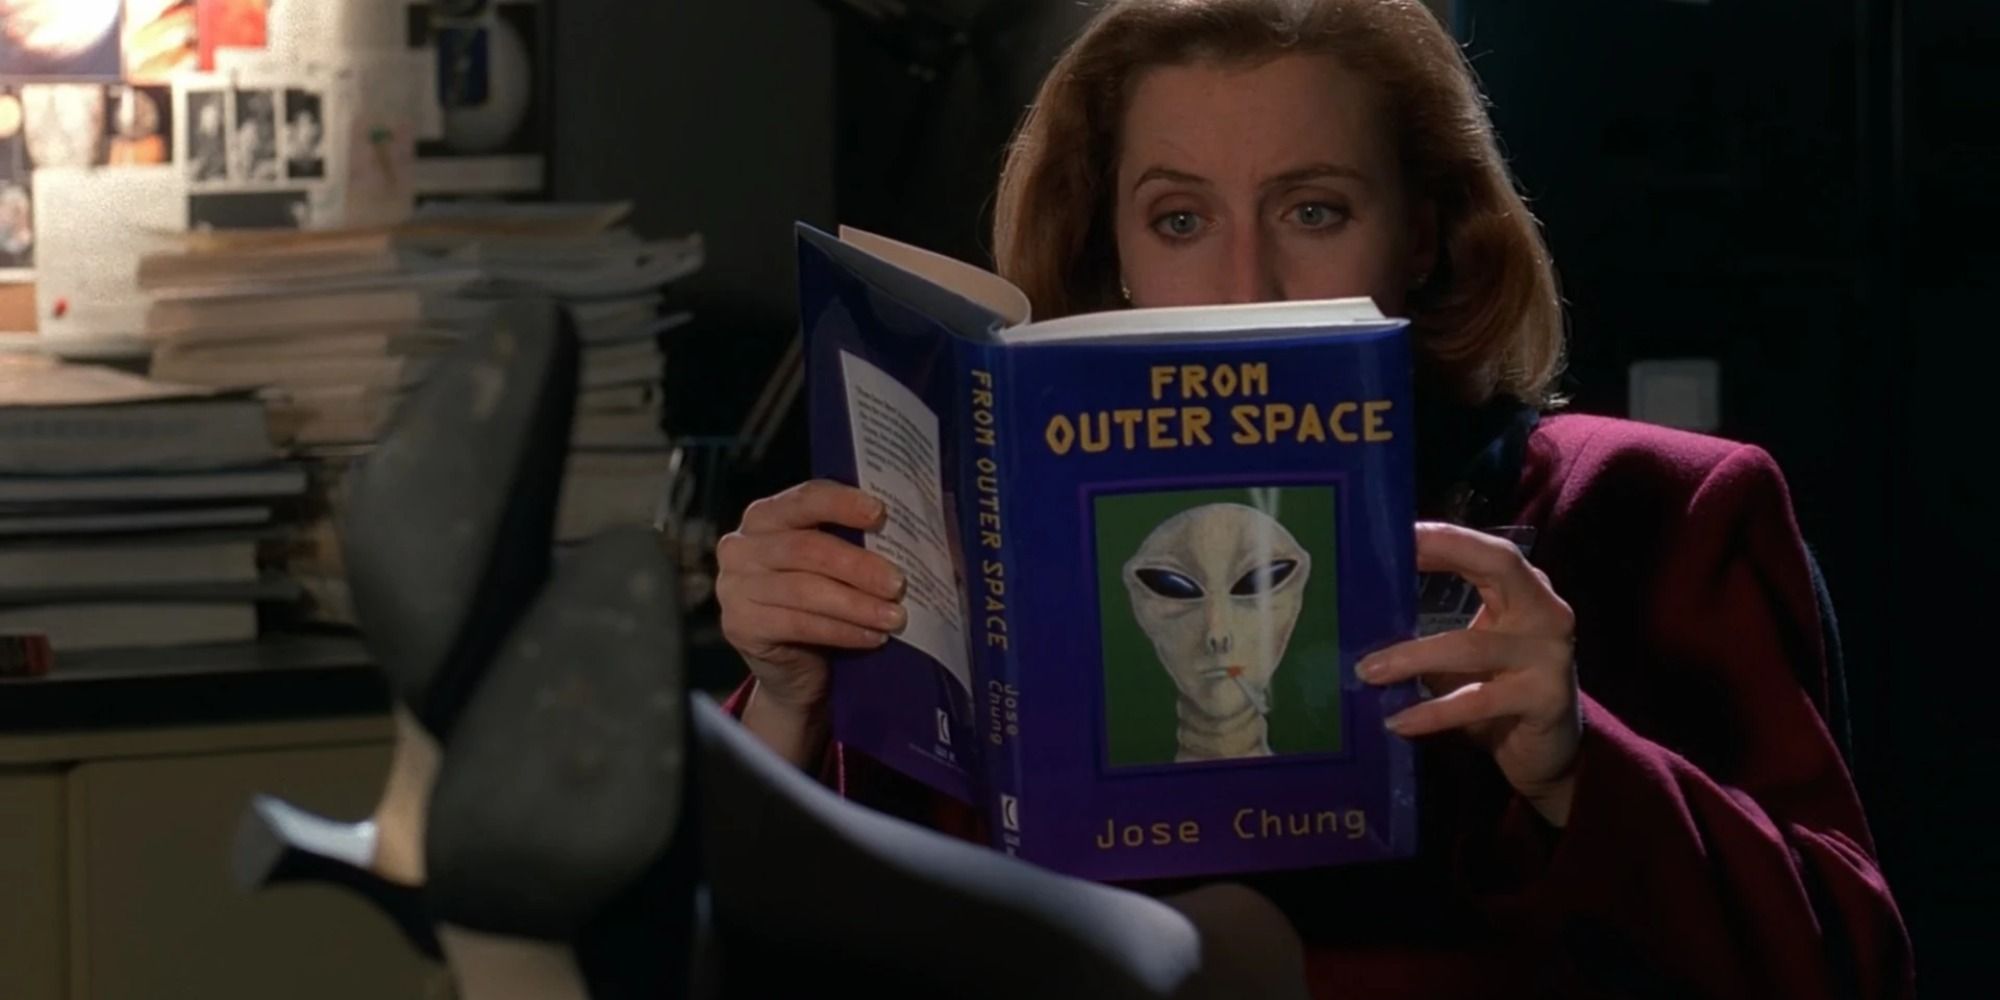 X-Files - Jose Chung’s From Outer Space